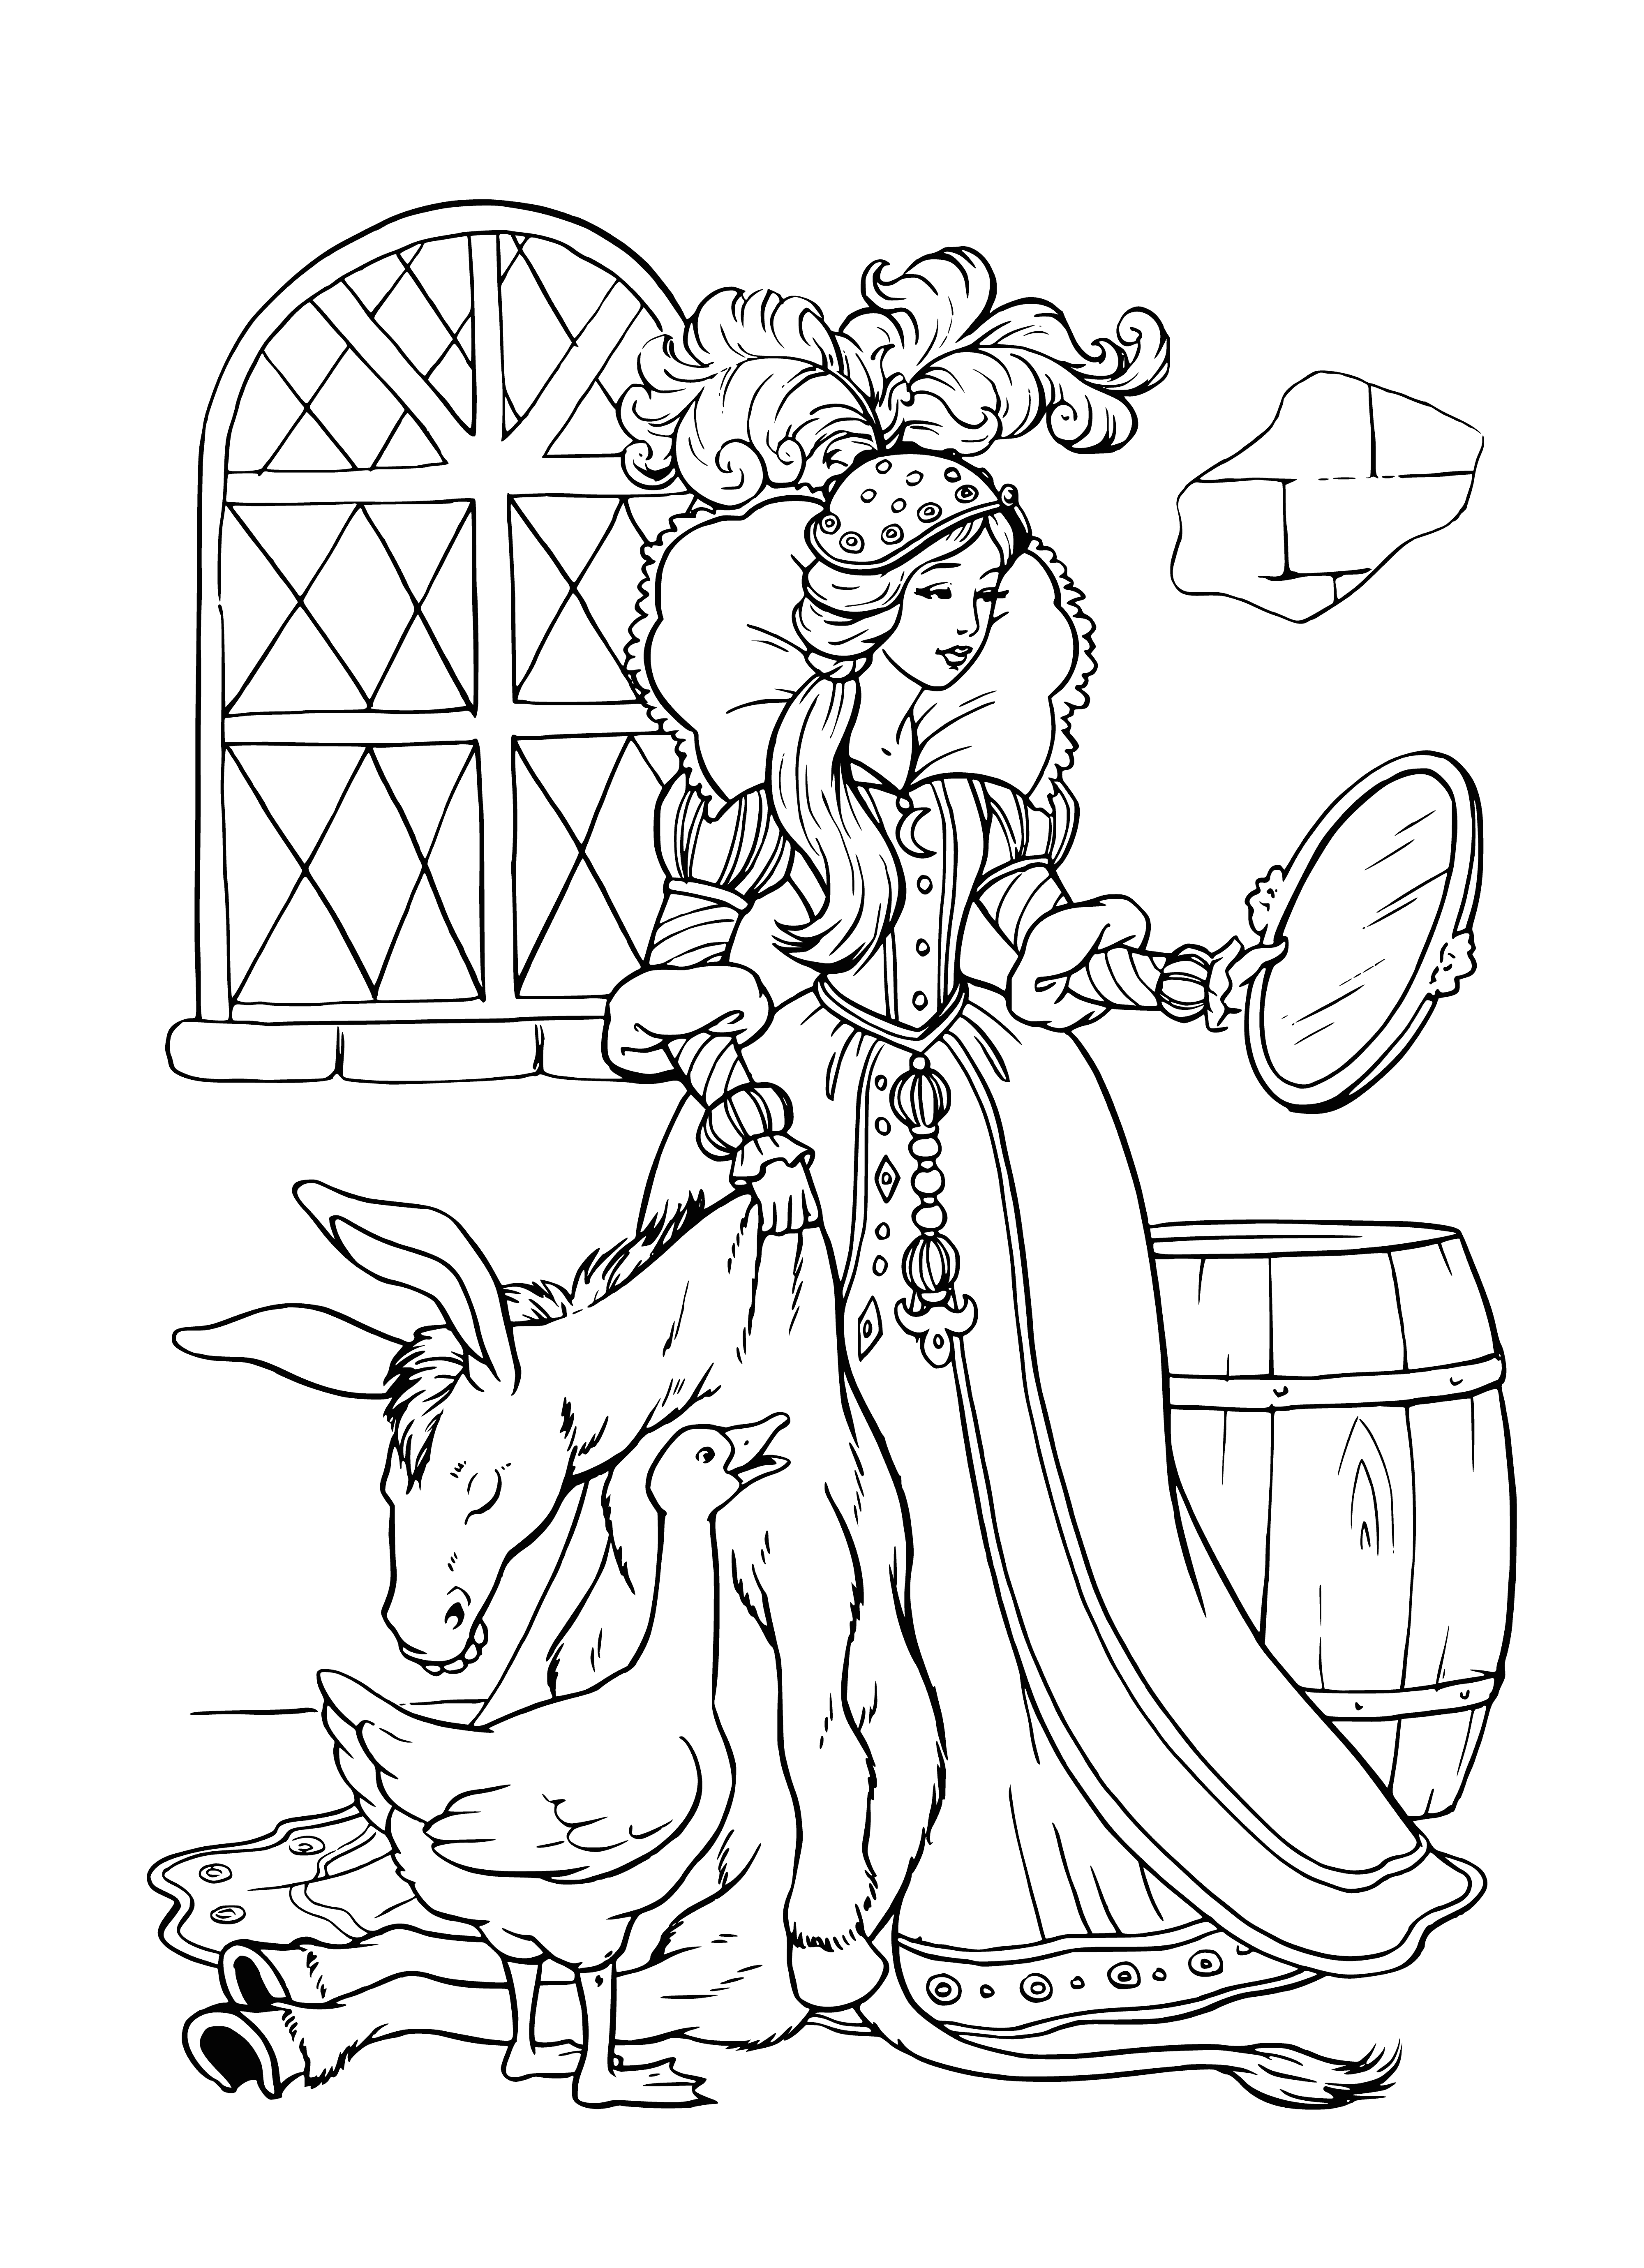 coloring page: Young princess sits on a throne, wearing a beautiful dress and tiara - looks radiant and happy.